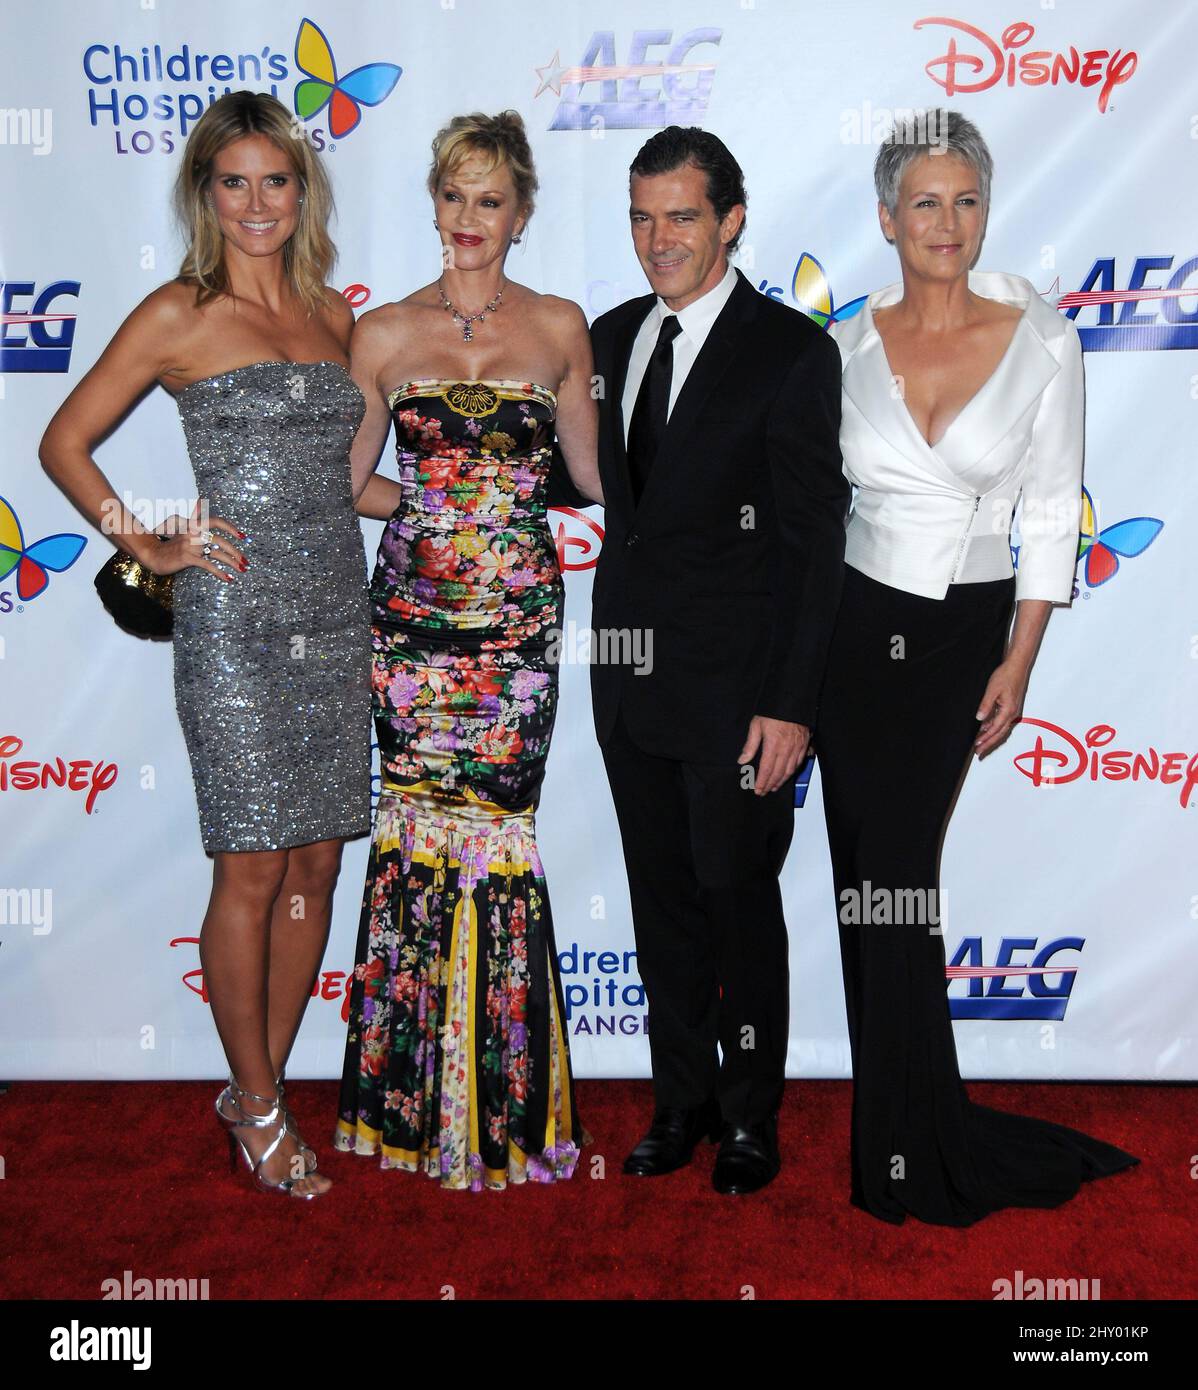 Heidi Klum, Melanie Griffith, Antonio Banderas and Jamie Lee Curtis during the Children's Hospital Los Angeles Gala 'Noche De Ninos' Held at L.A. Live Event Deck, Los Angeles Stock Photo